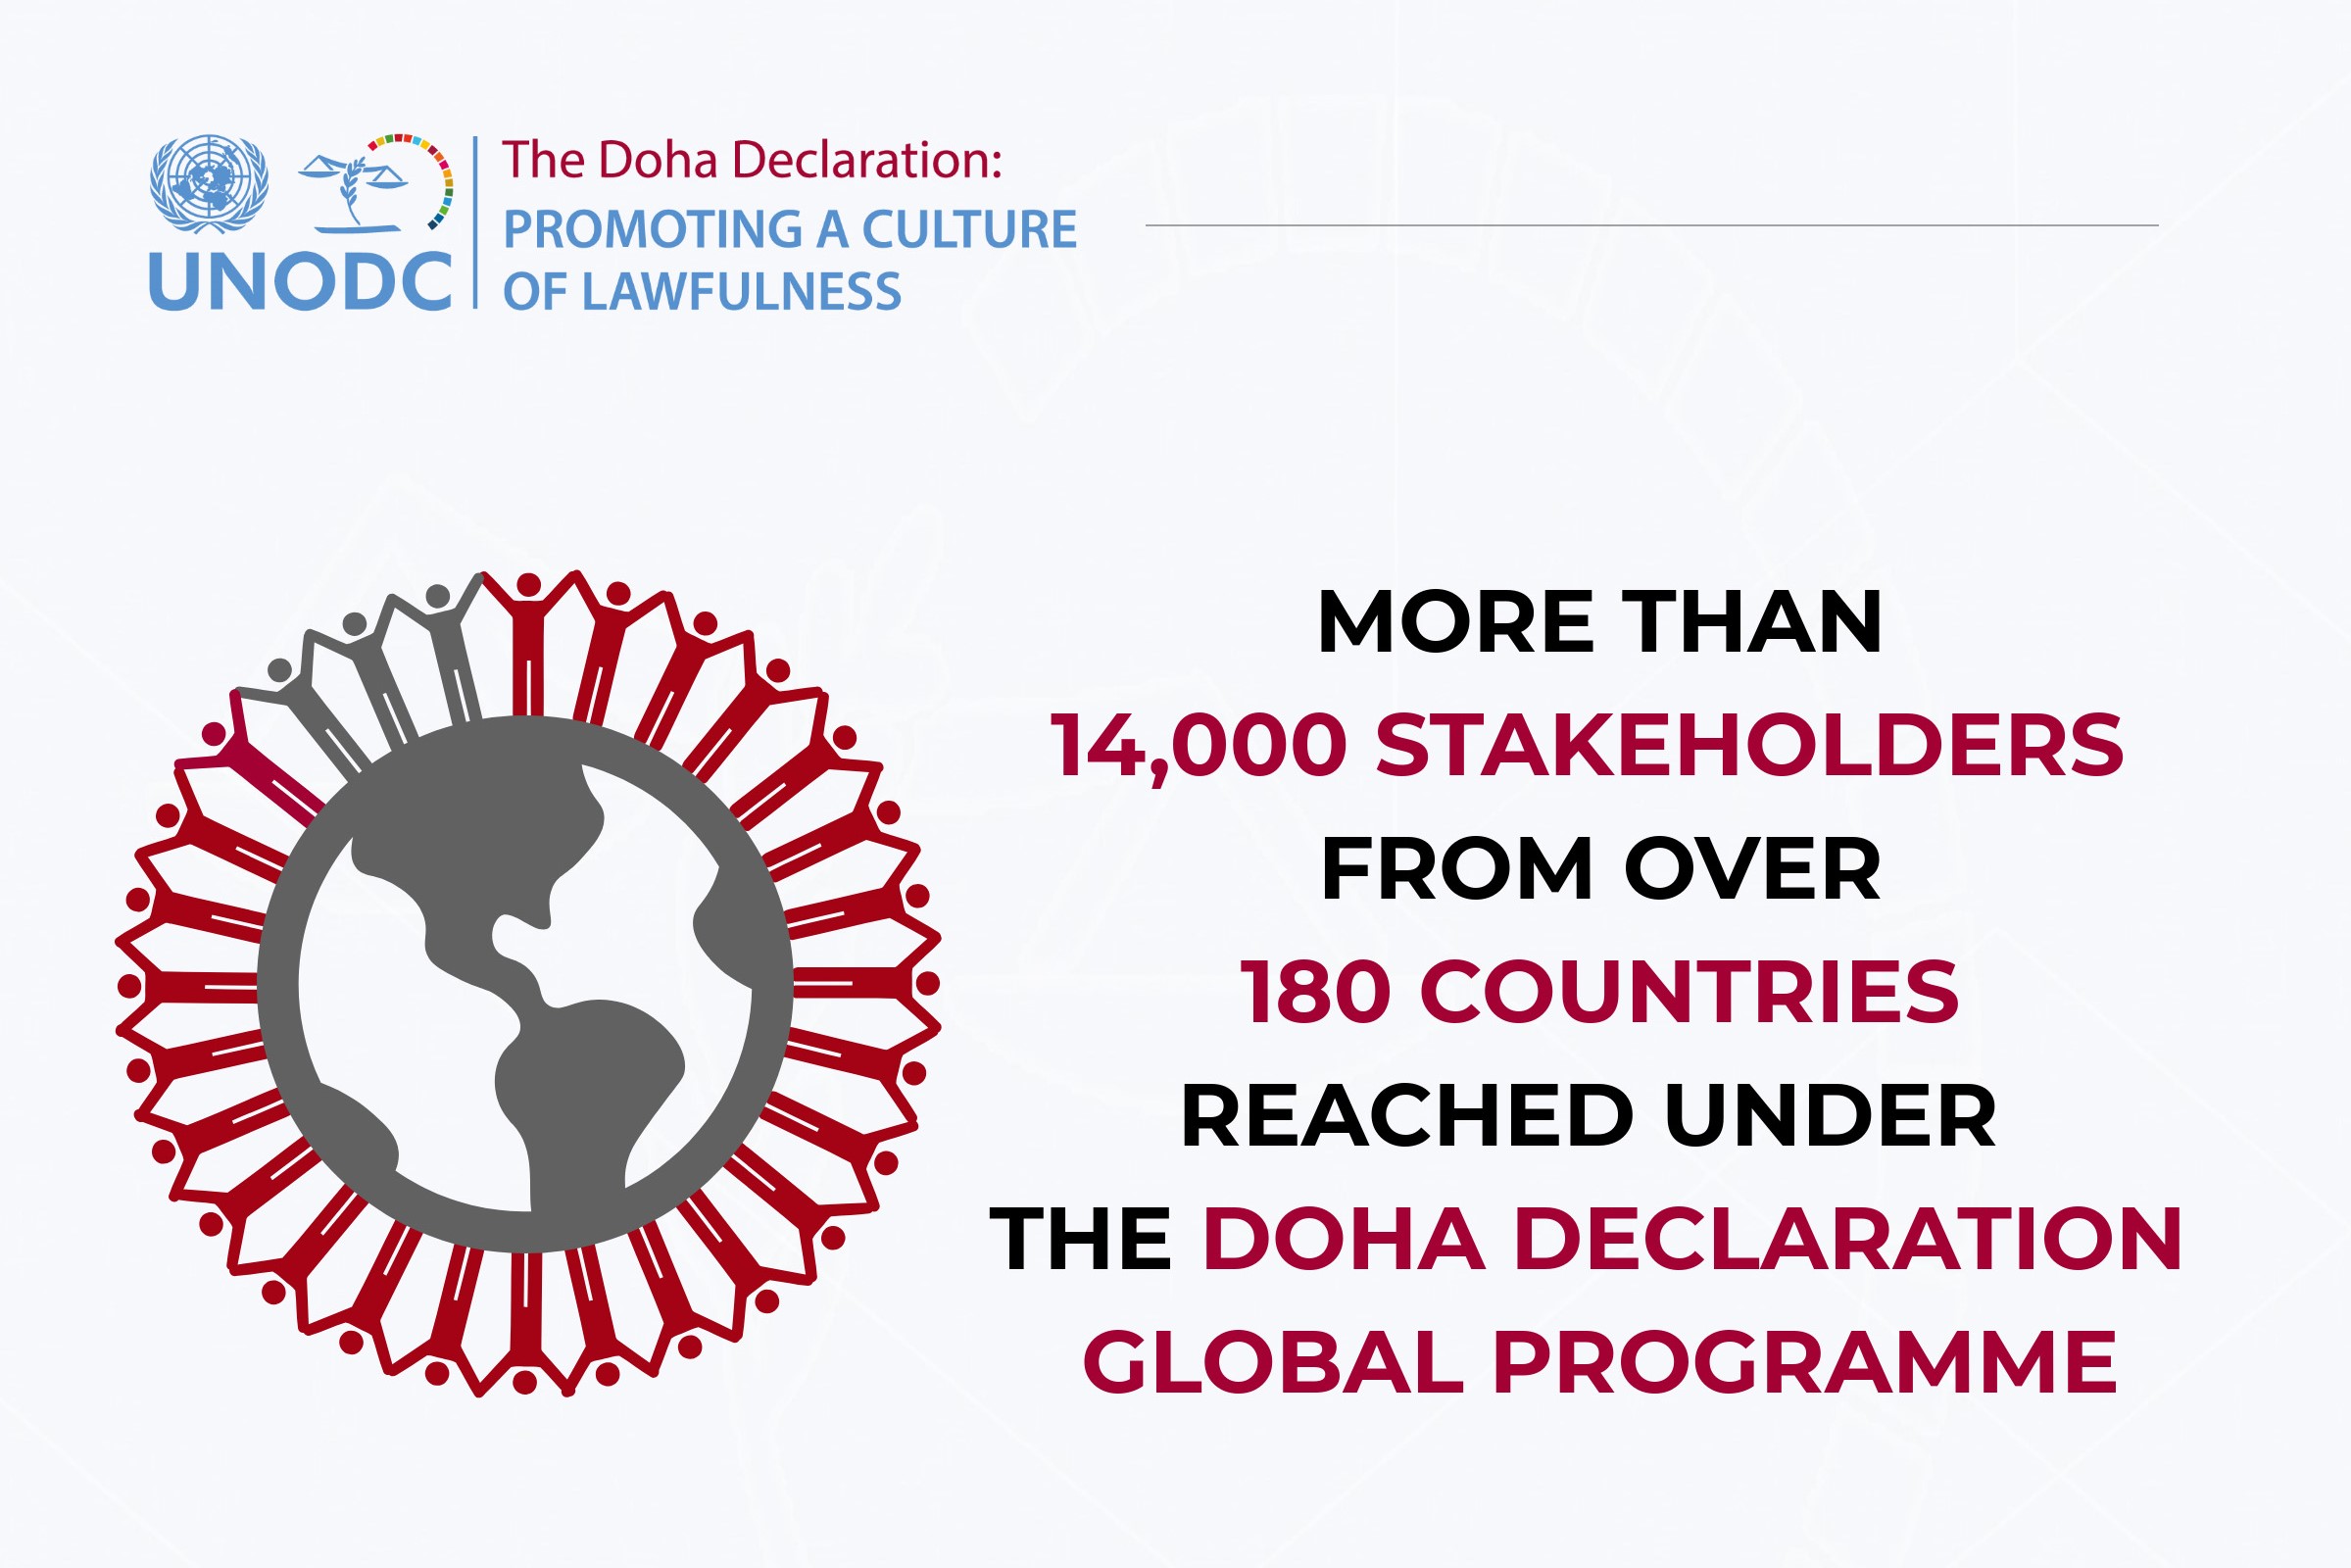 Two years of impactful achievements with the Doha Declaration Global Programme